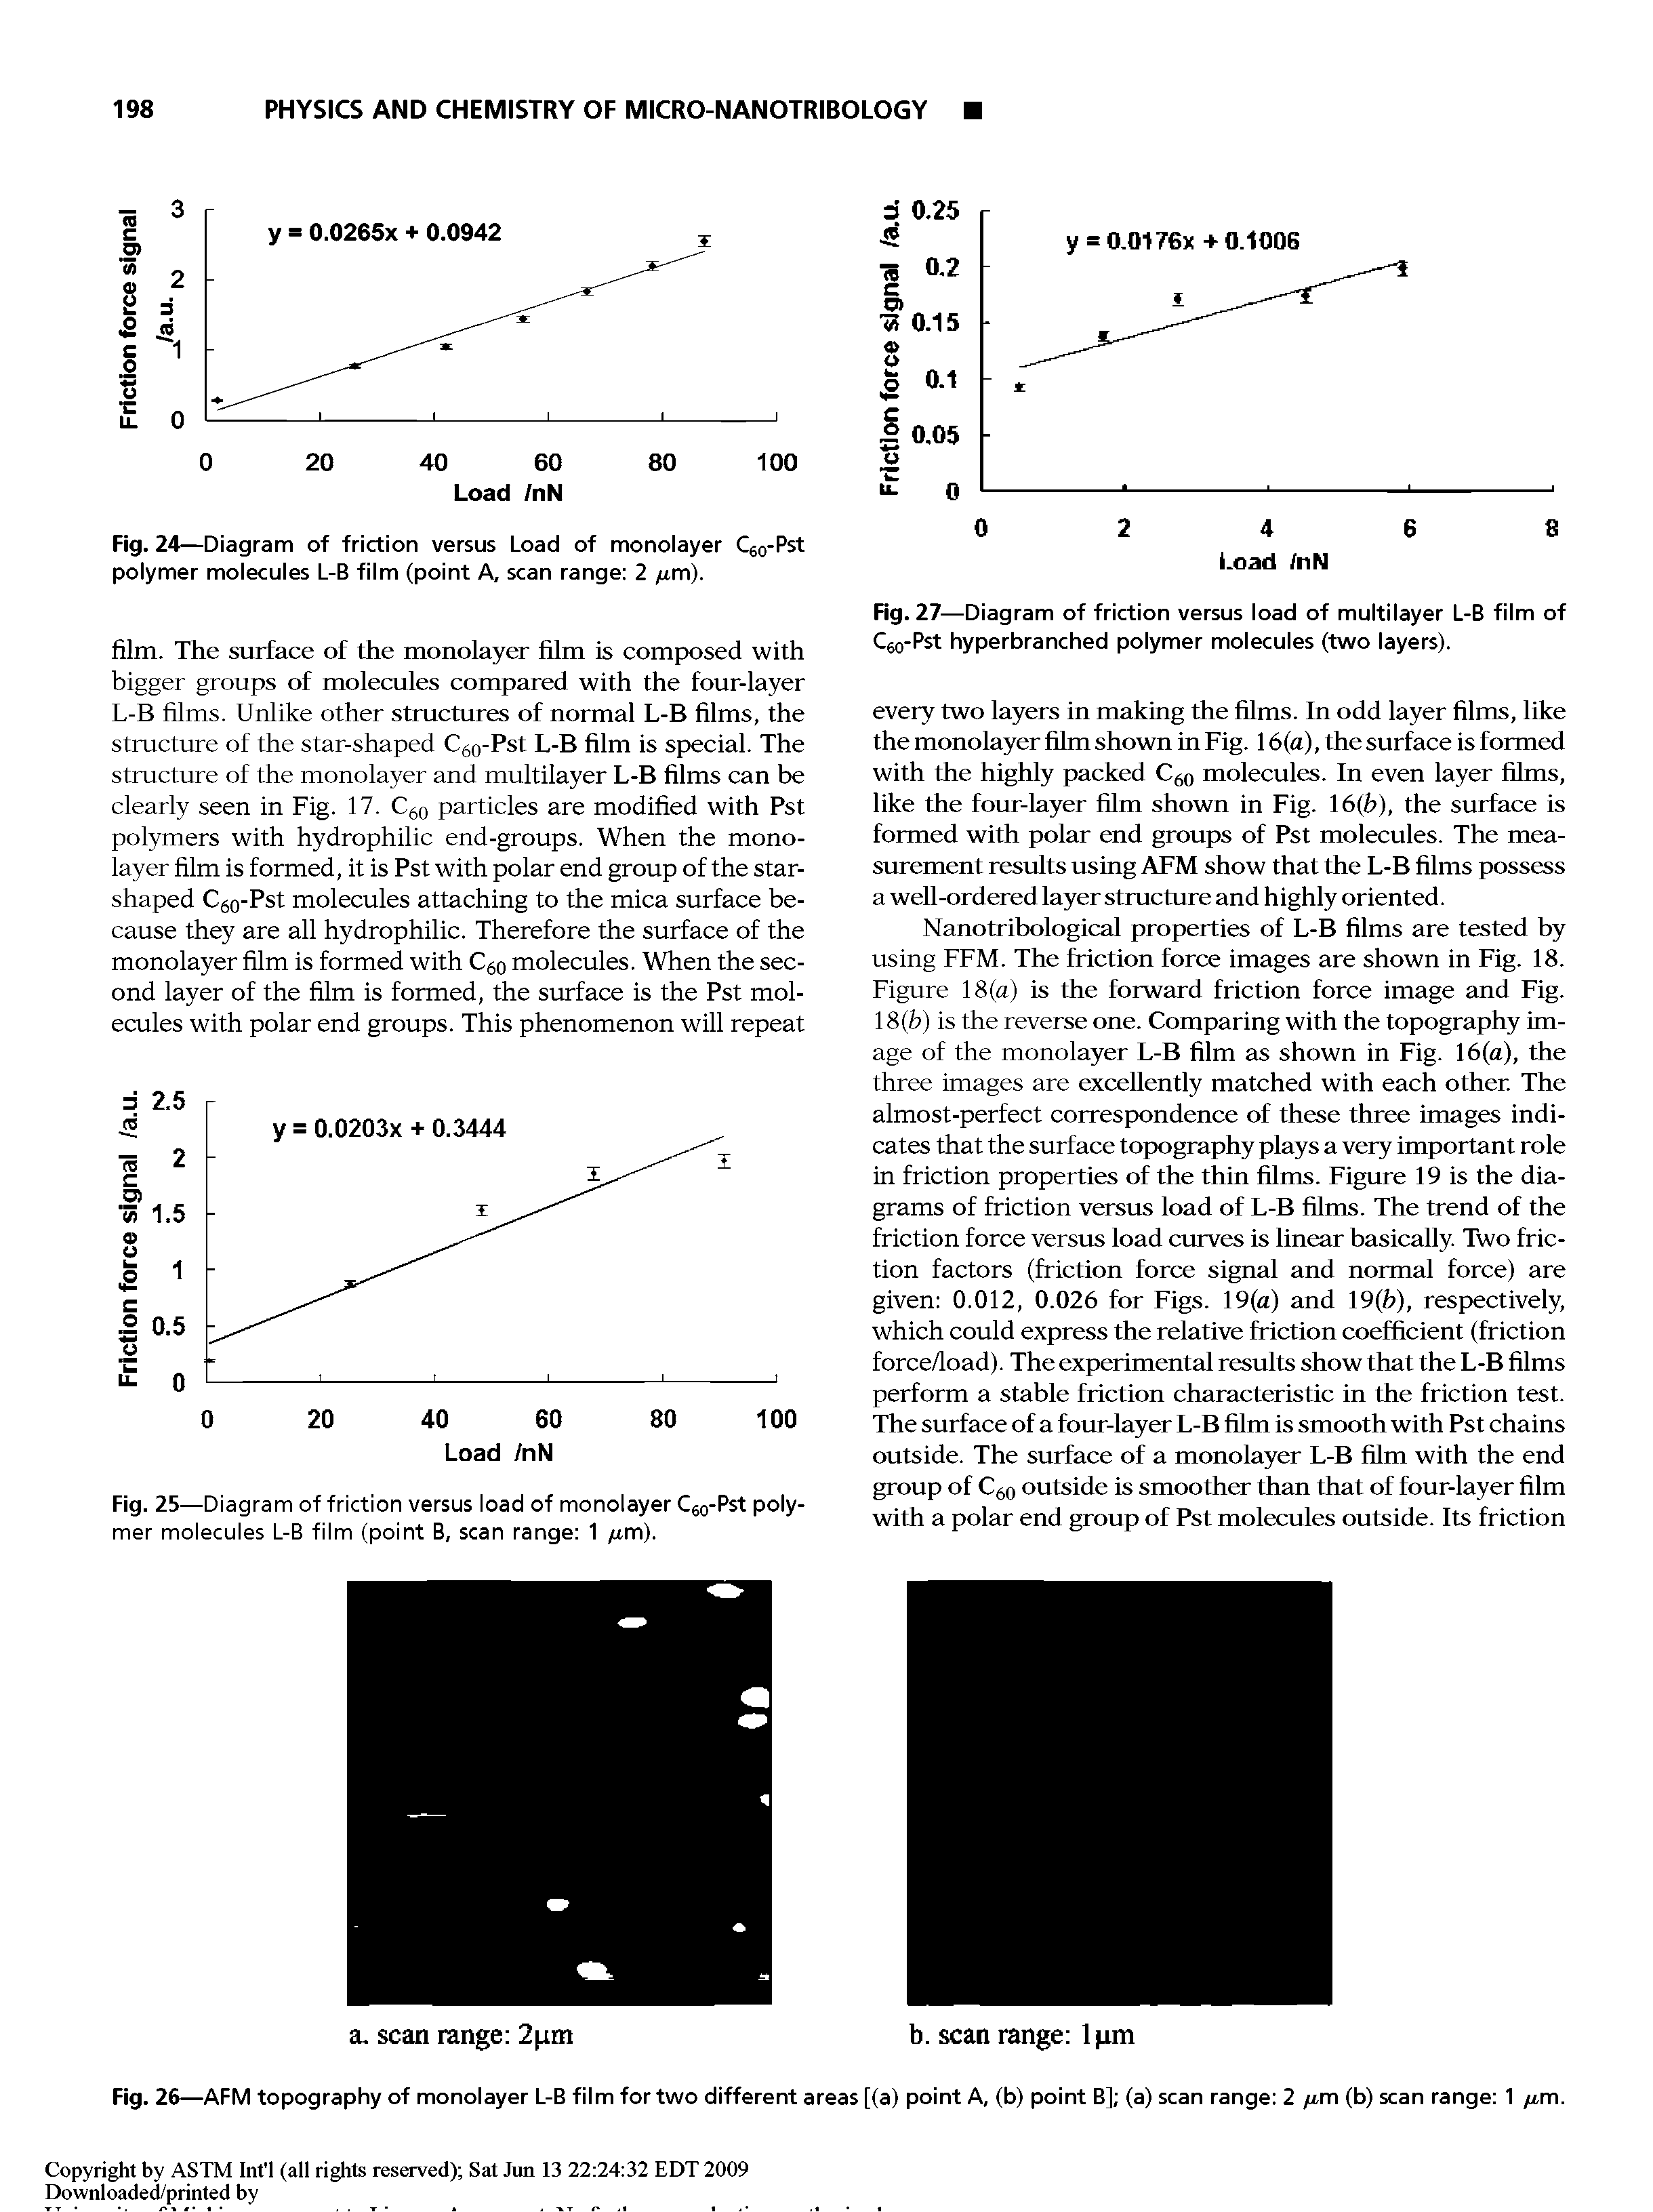 Fig. 24—Diagram of friction versus Load of monolayer Cjo-Pst polymer molecules L-B film (point A, scan range 2 yiim).